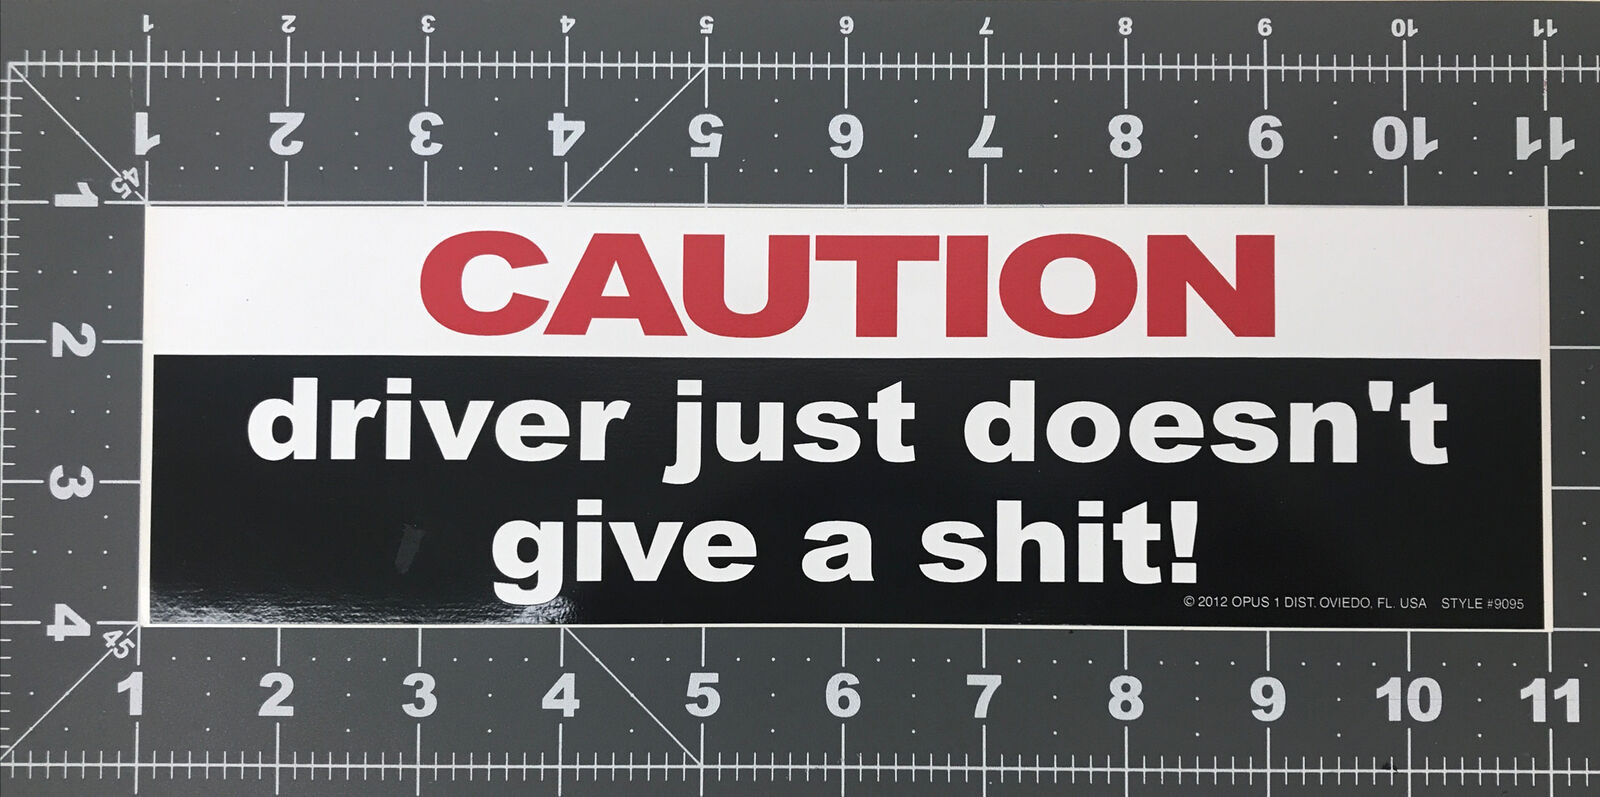 New Cation Driver Just Doesn’t Give A Shit!bumper Sticker Helmet Decal Opus Usa